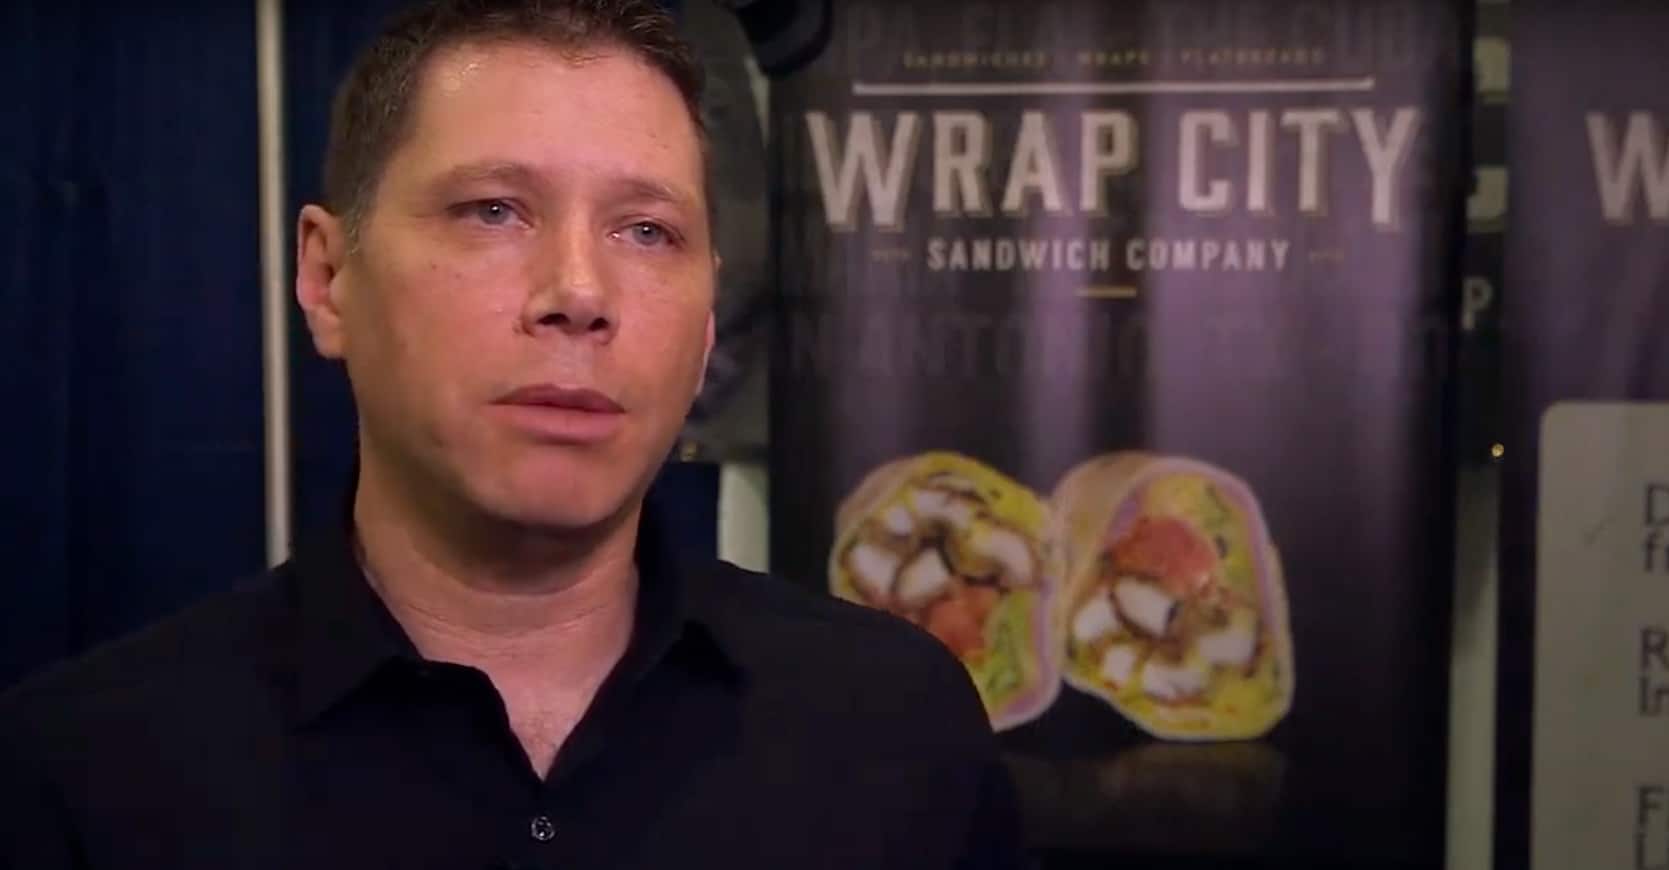 About Description: A man in a black shirt standing in front of a wrap city banner.